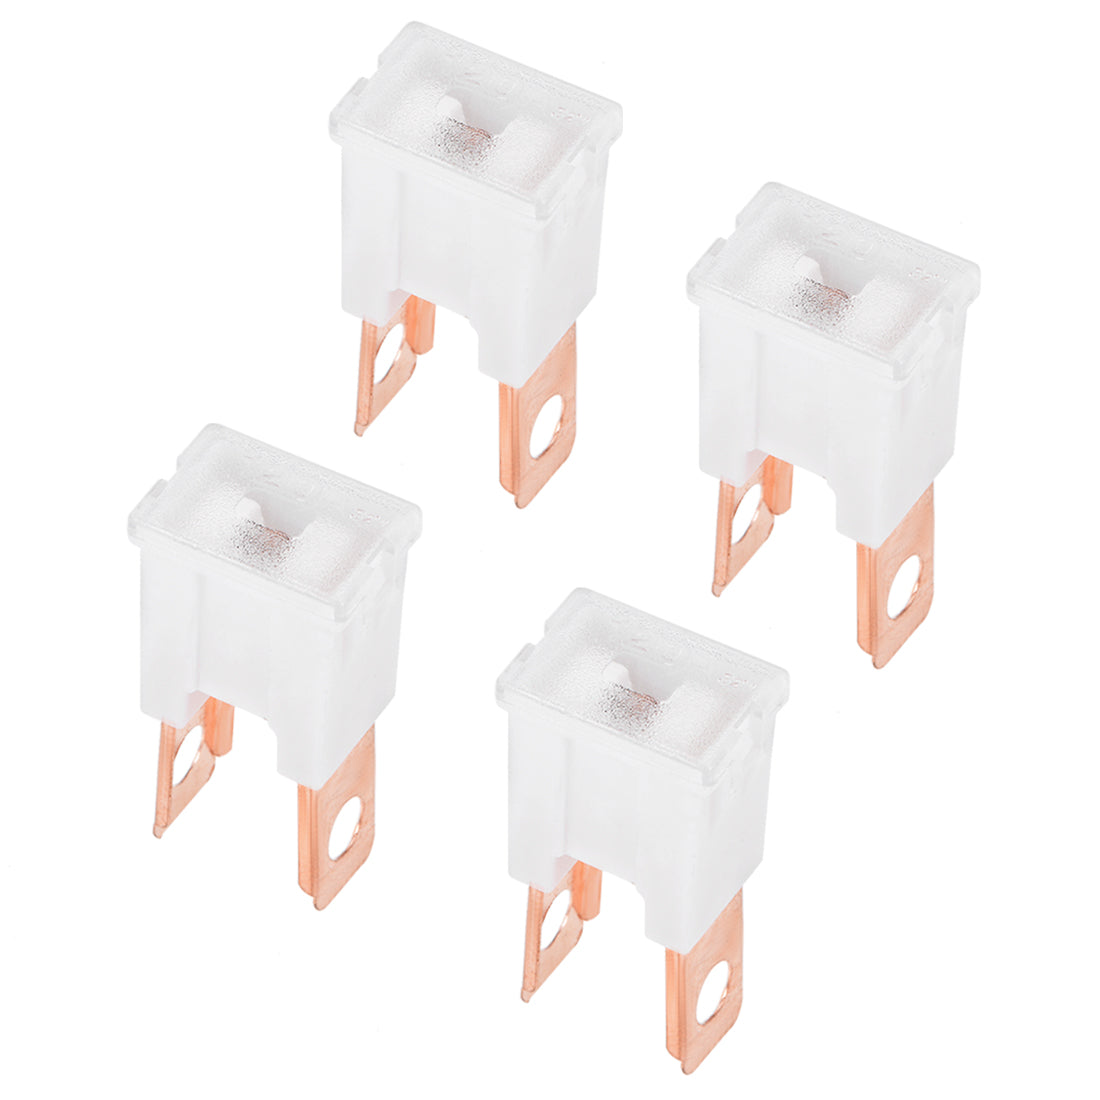 uxcell Uxcell Cartridge Fuse 32V 120A Male Terminal Blade J Case Box for Truck 4pcs